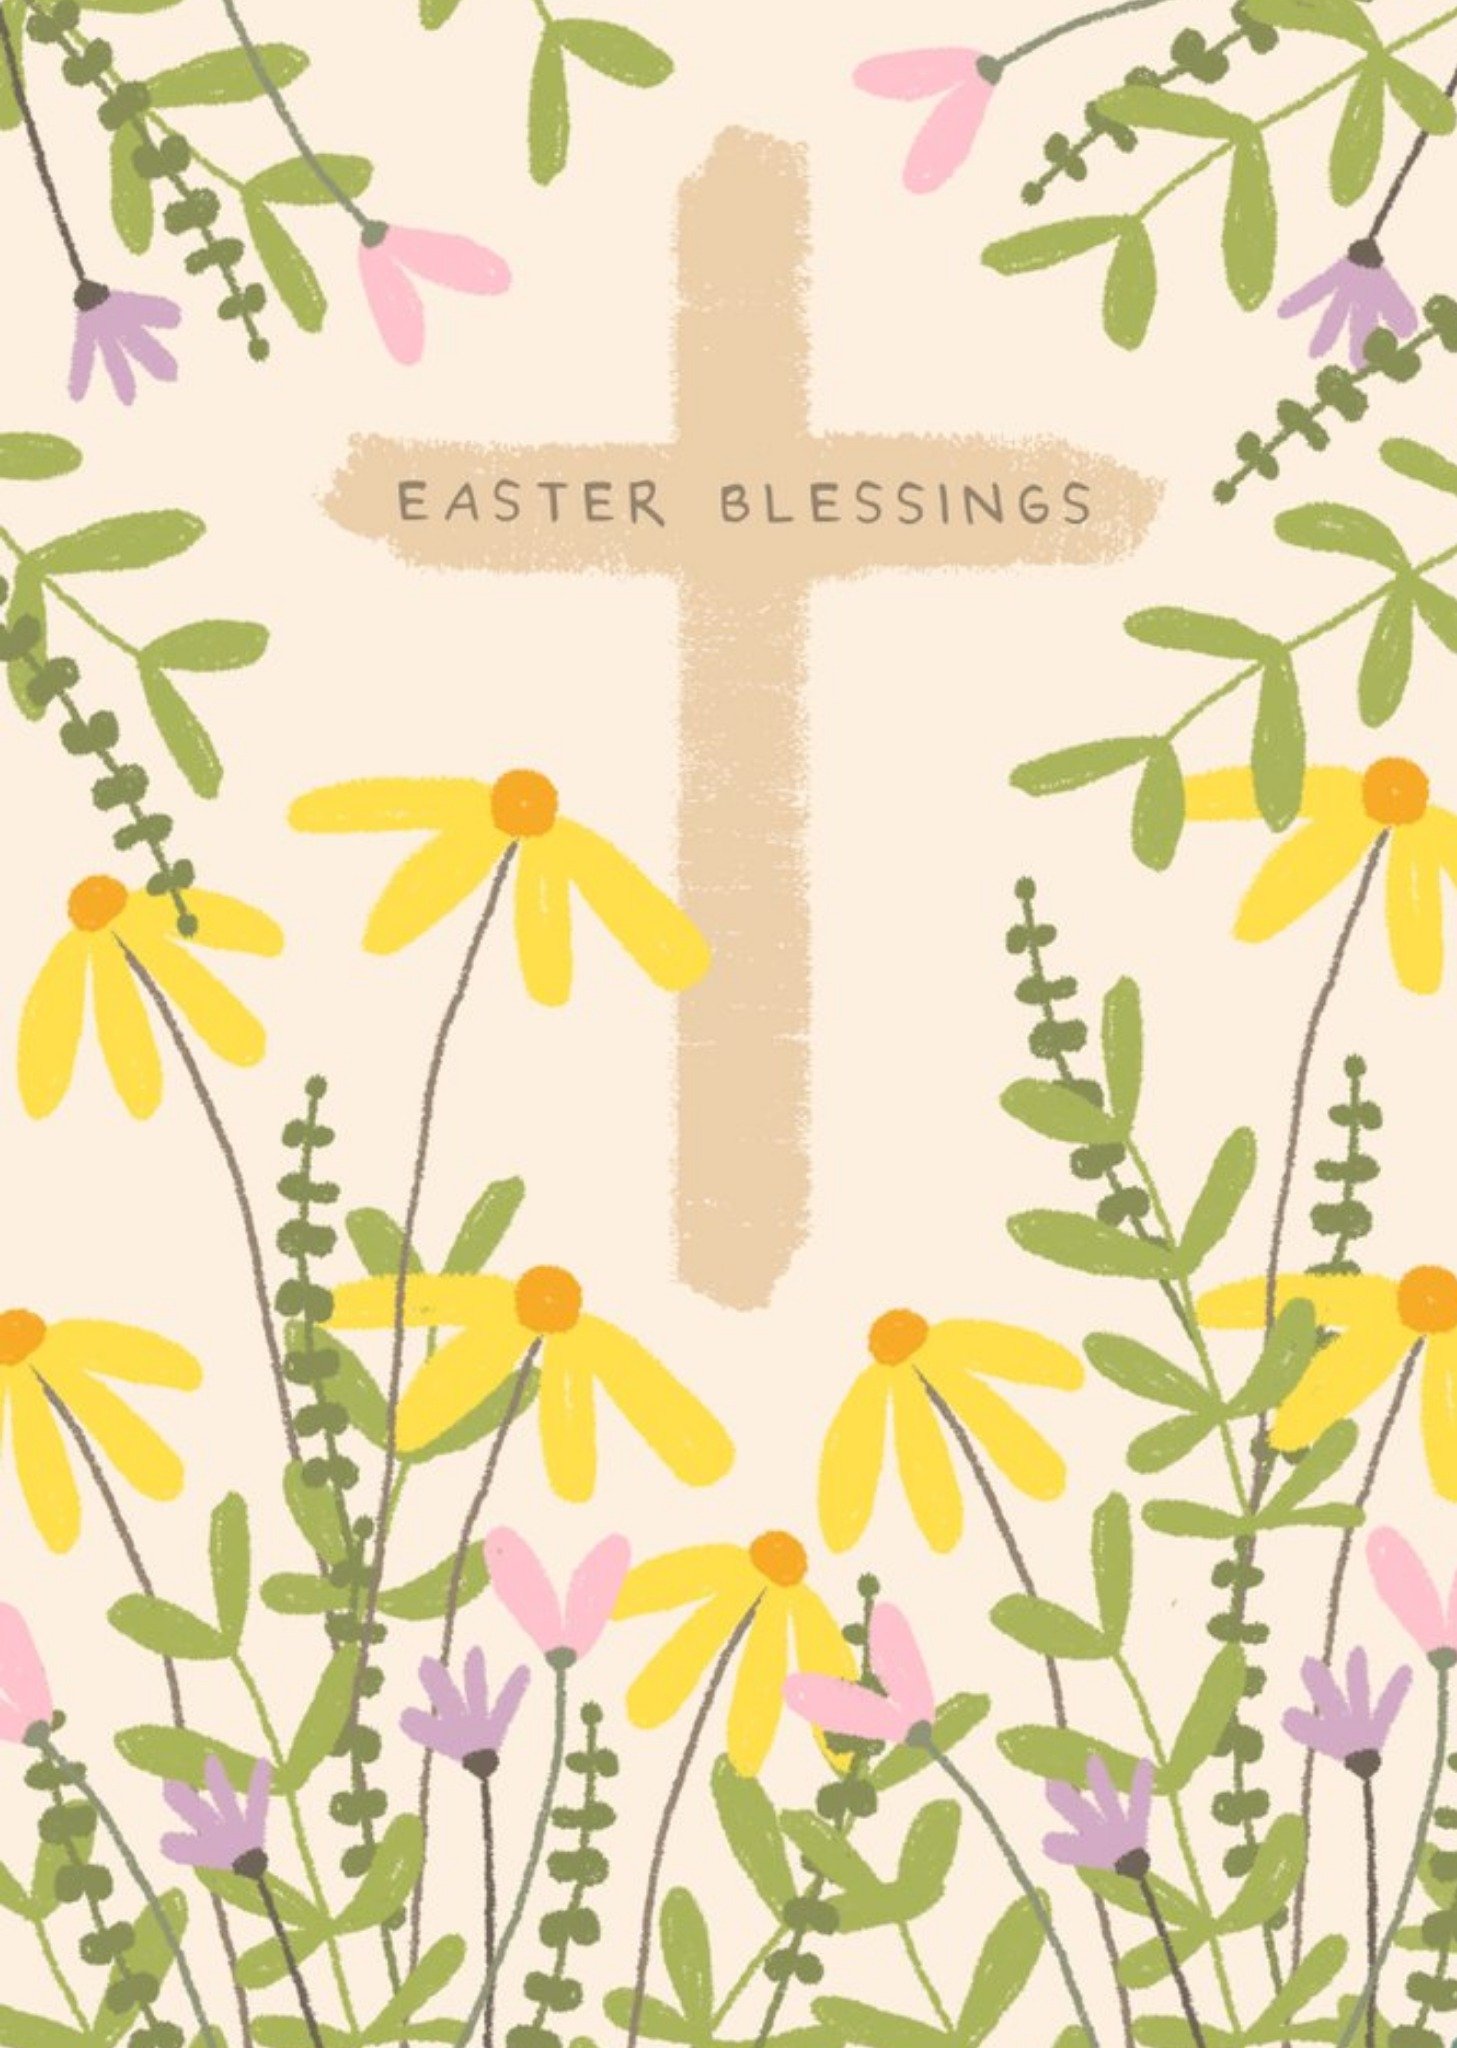 Moonpig Illustration Of The Christian Cross Surrounded By Flowers Easter Blessing Card Ecard